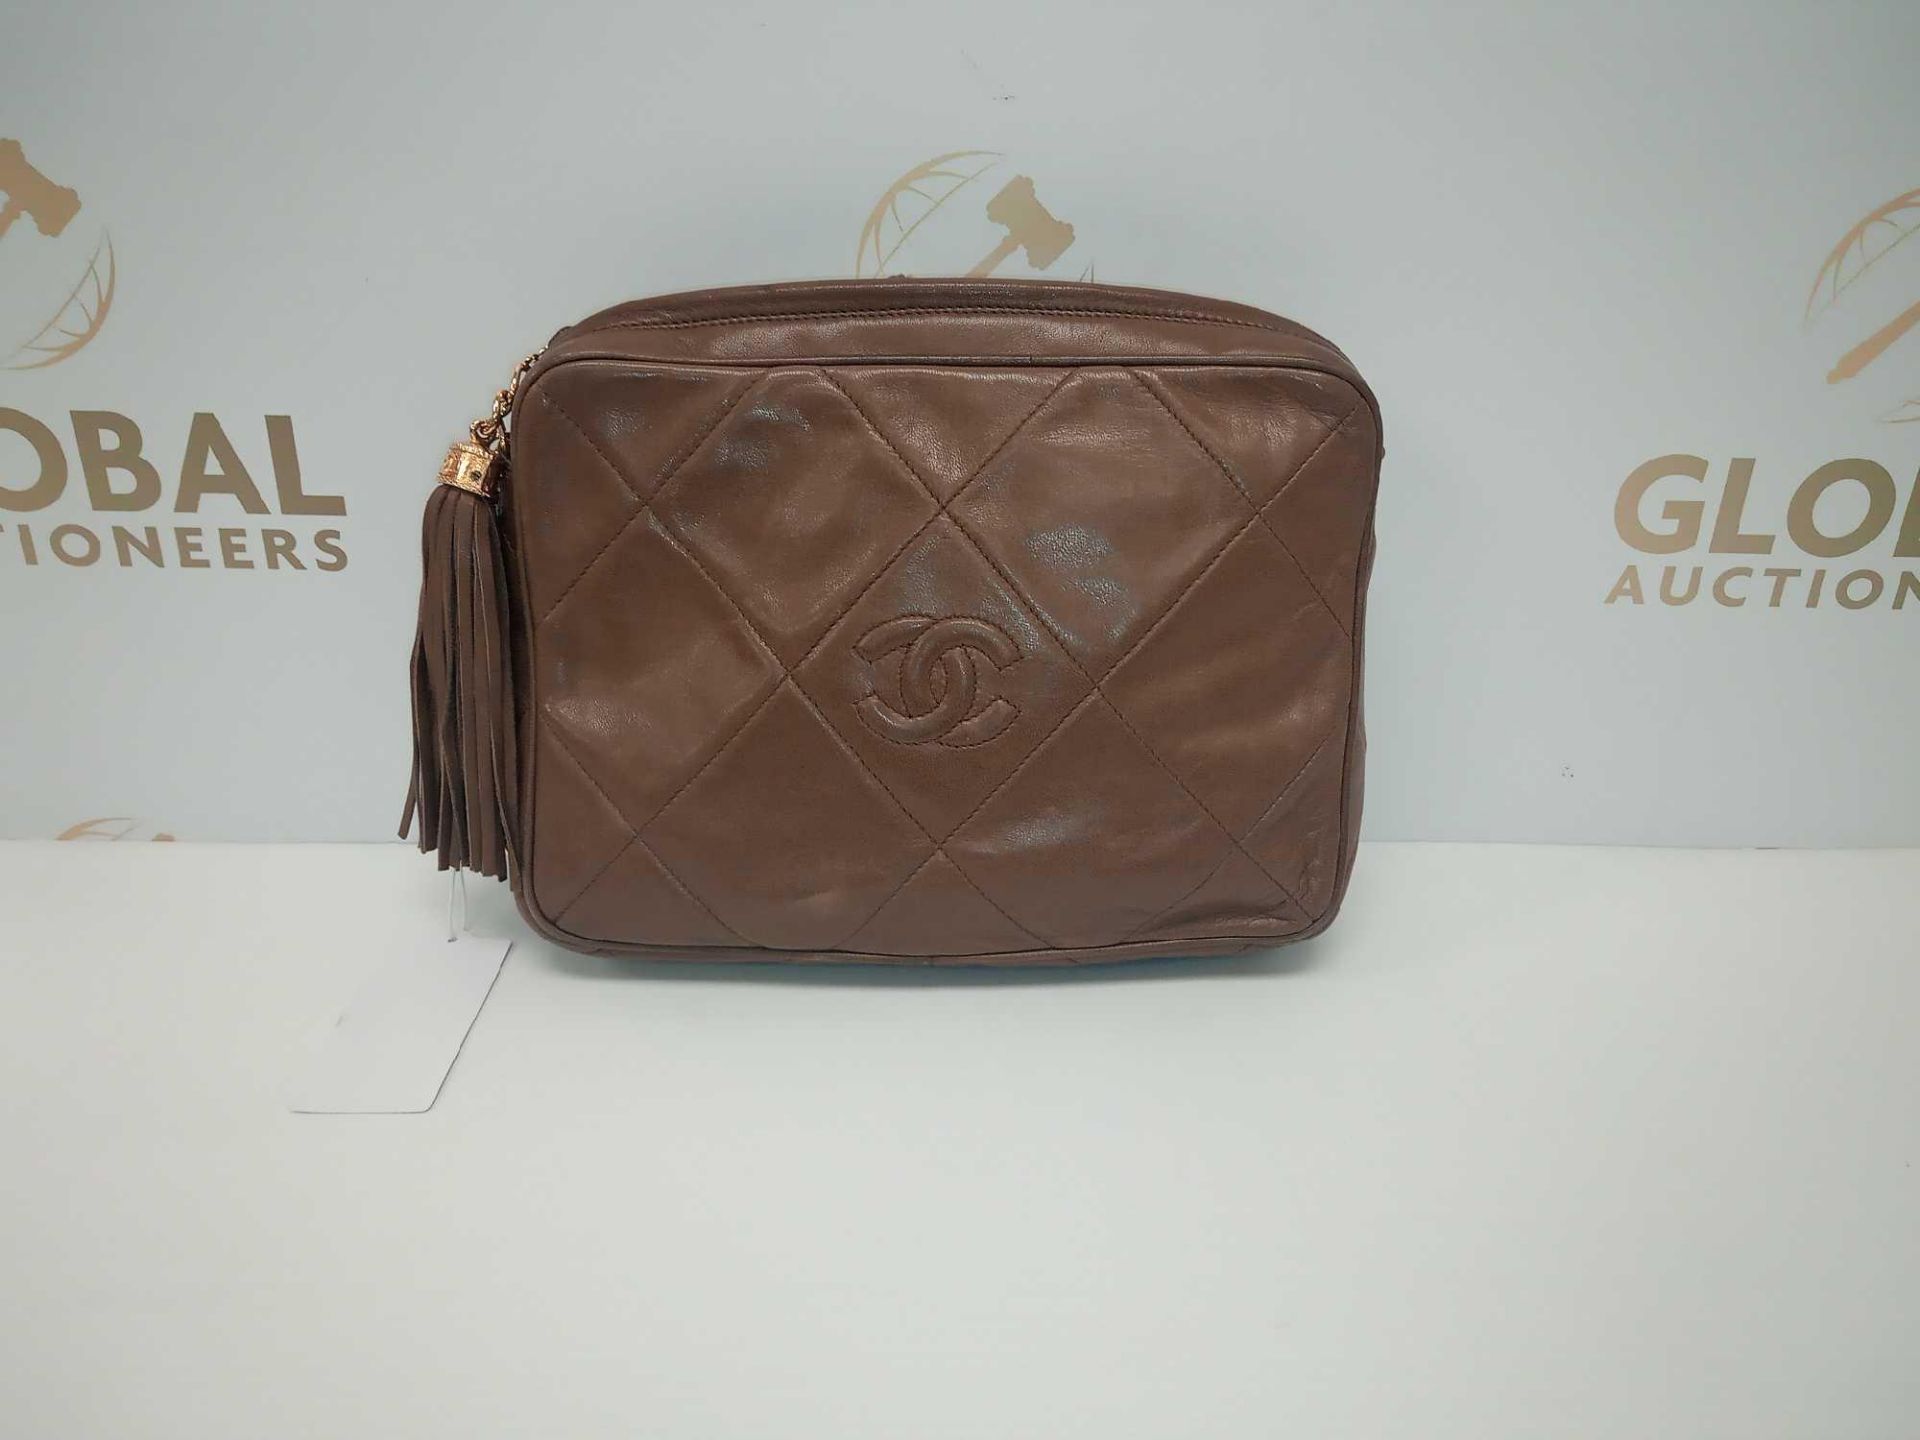 RRP £2300 Chanel Tassle Camera Bag Brown Calf Leather (Aao7818)Grade A (Appraisals Available On